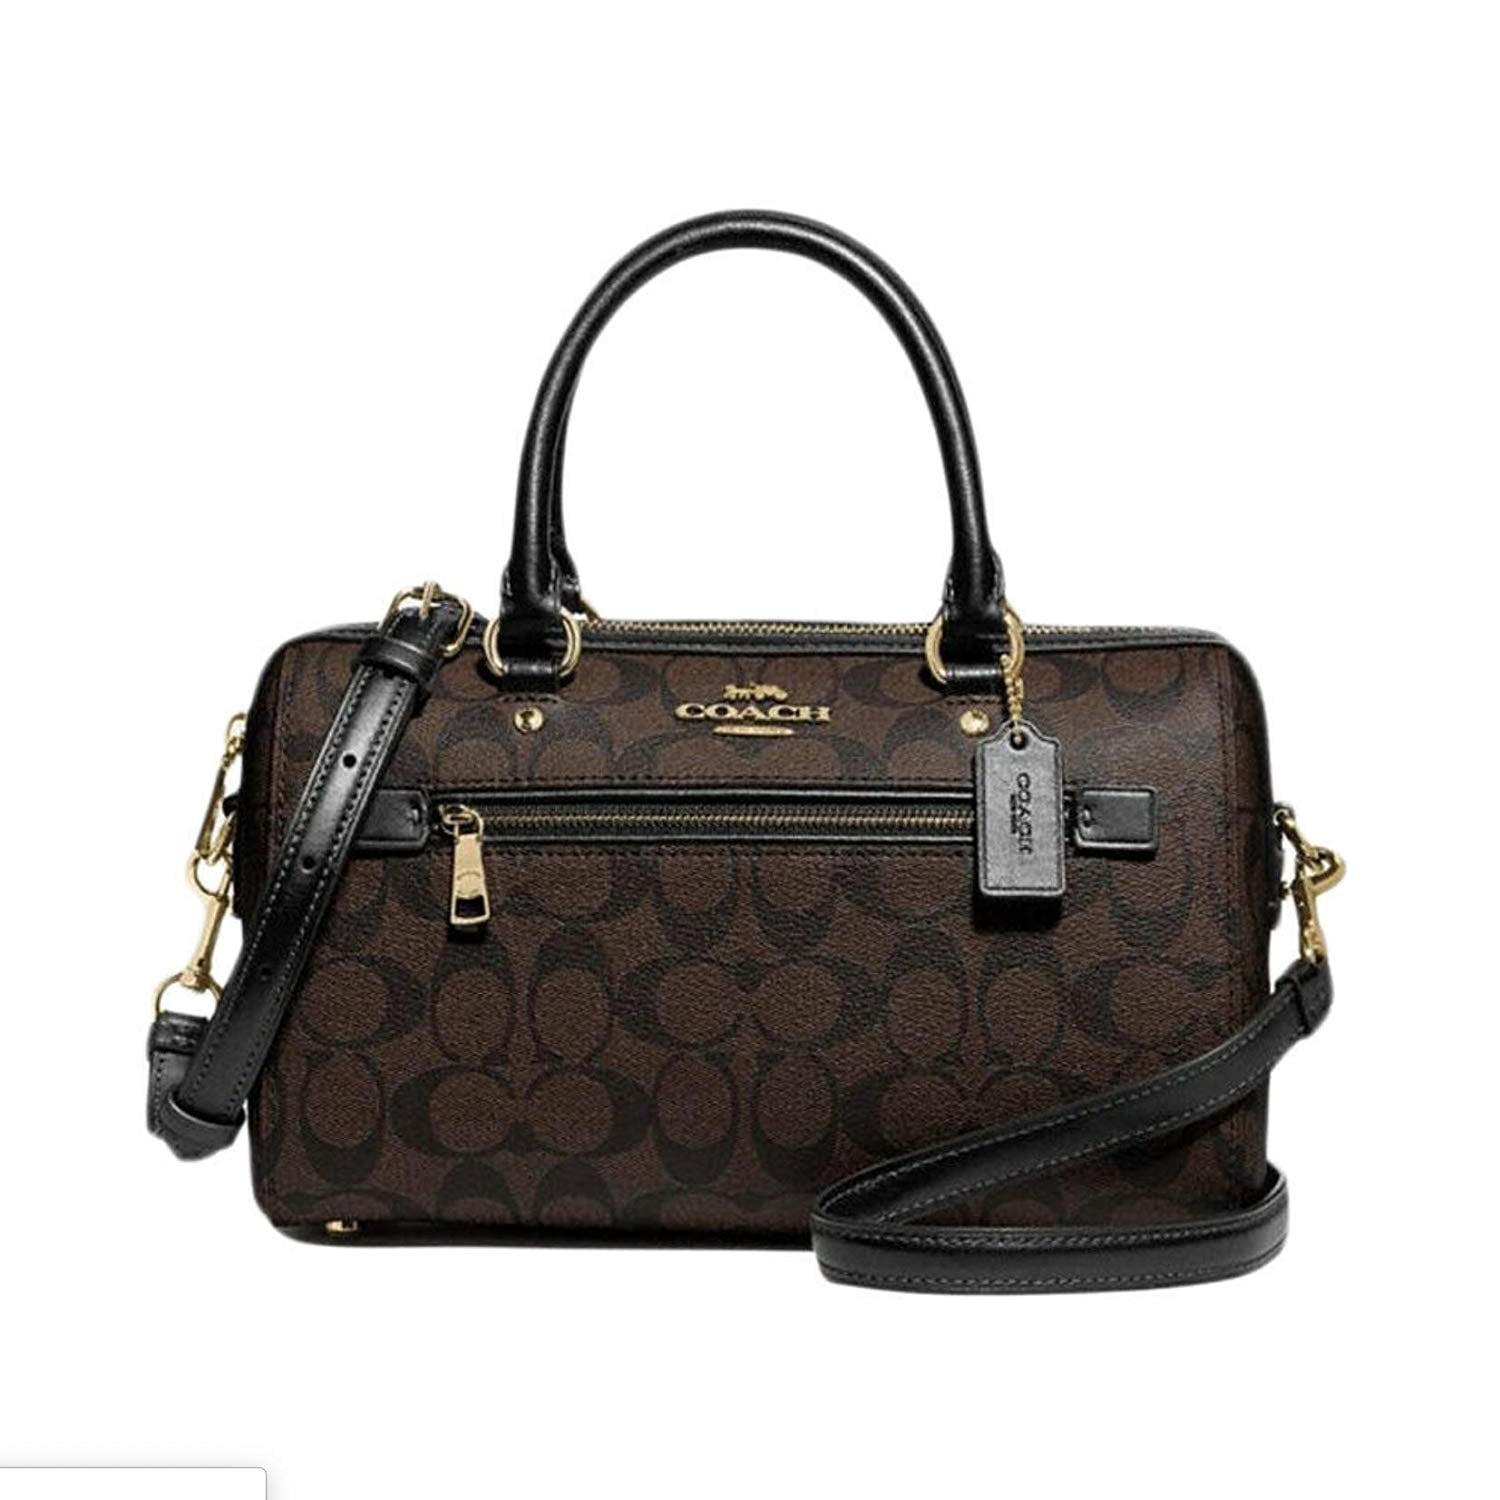 Buy Coach Signature Mini Sierra Satchel Purse (Im/Brown/Black) Online at  Lowest Price Ever in India | Check Reviews & Ratings - Shop The World